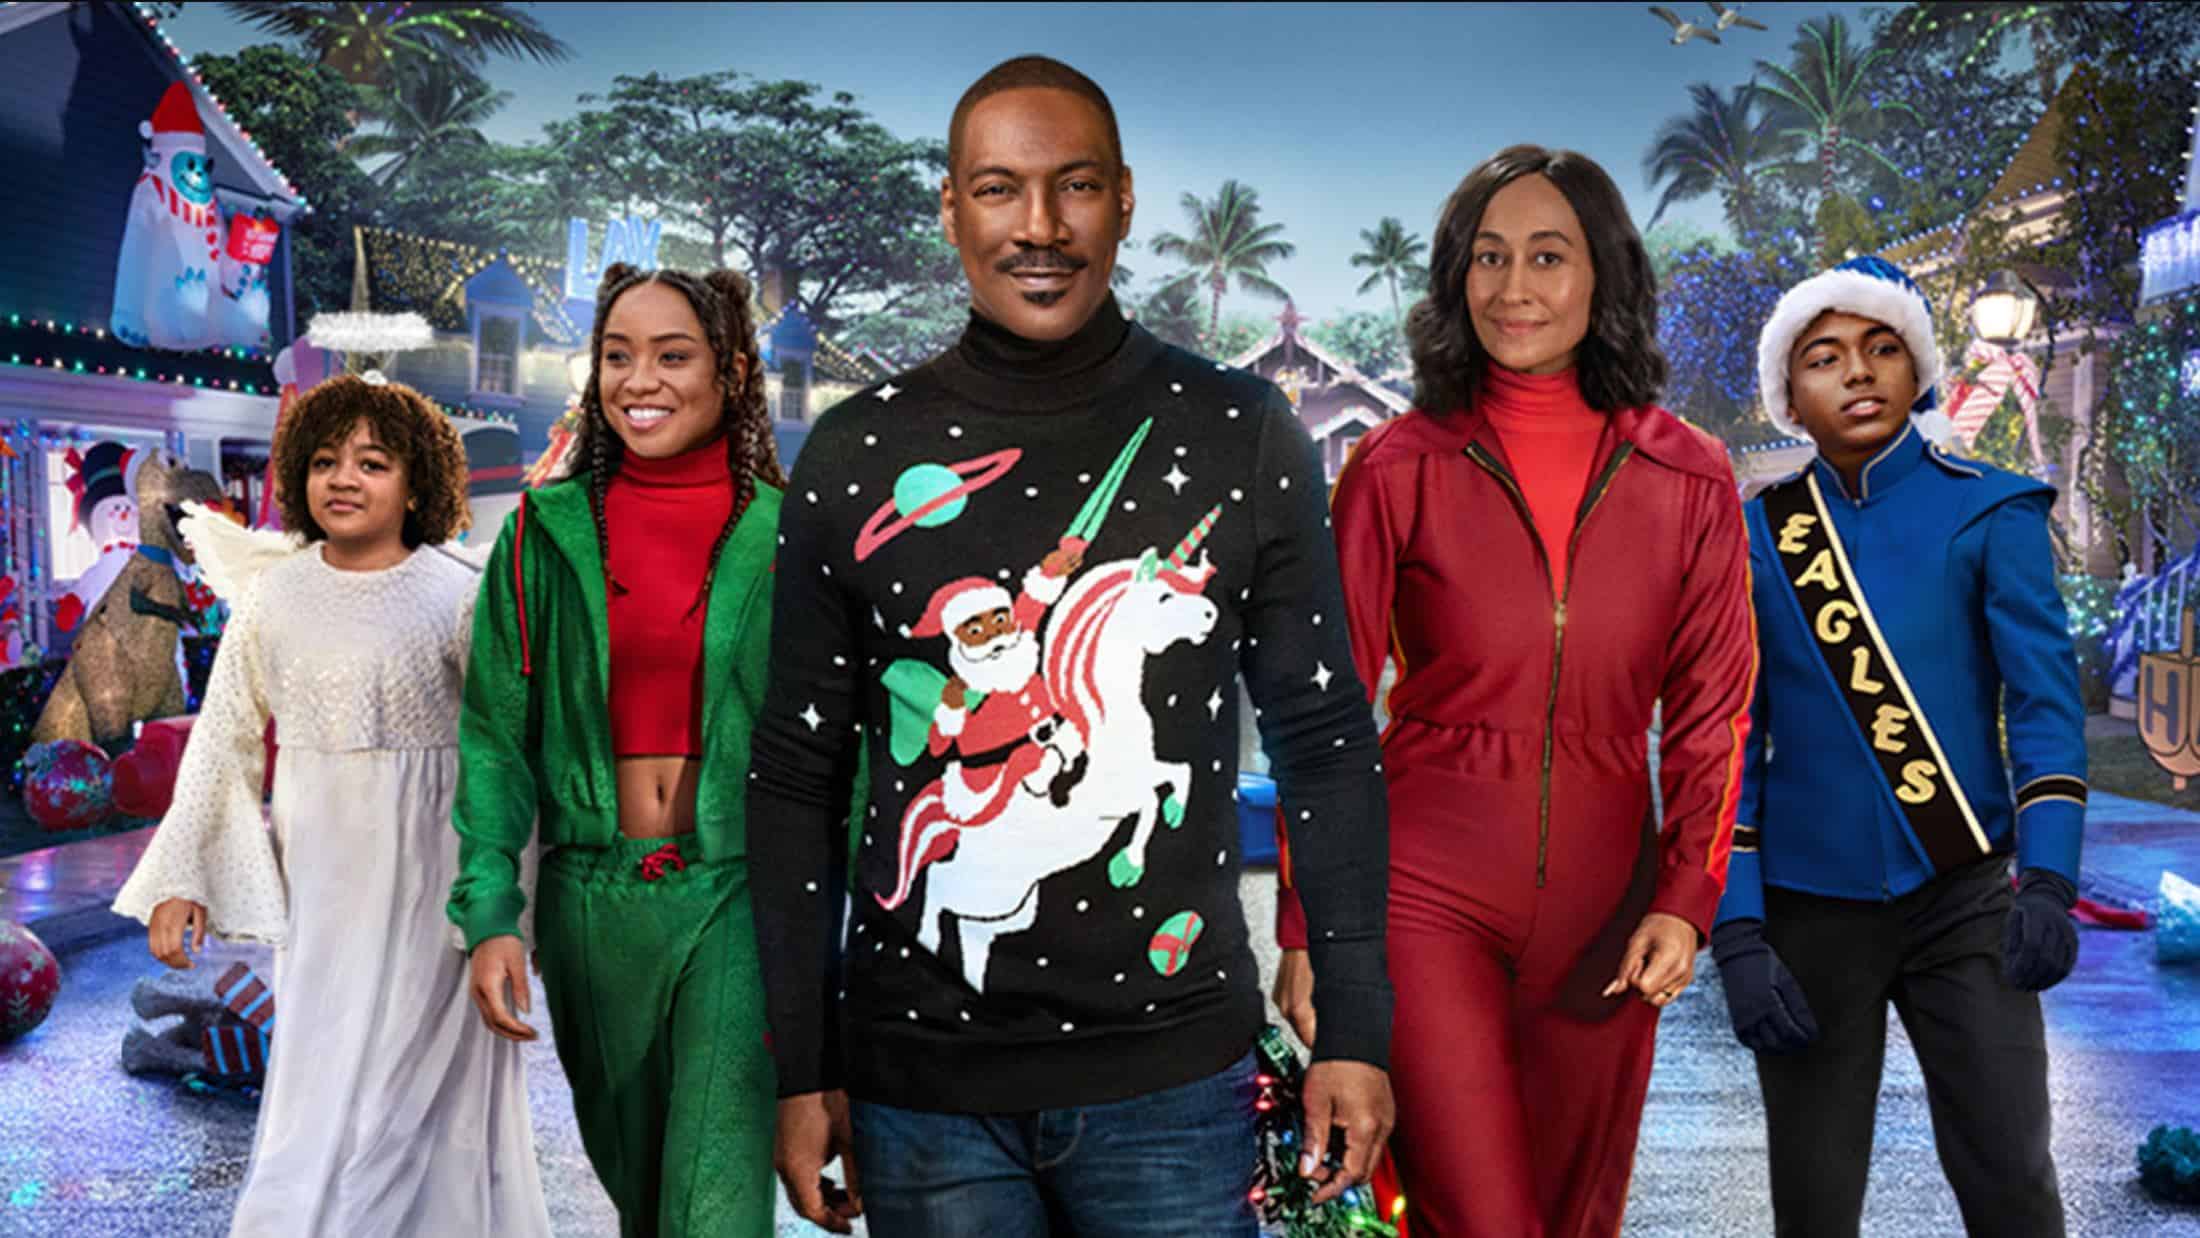 Eddie Murphy and Tracee Ellis Ross Shine in Prime Video's "Candy Cane